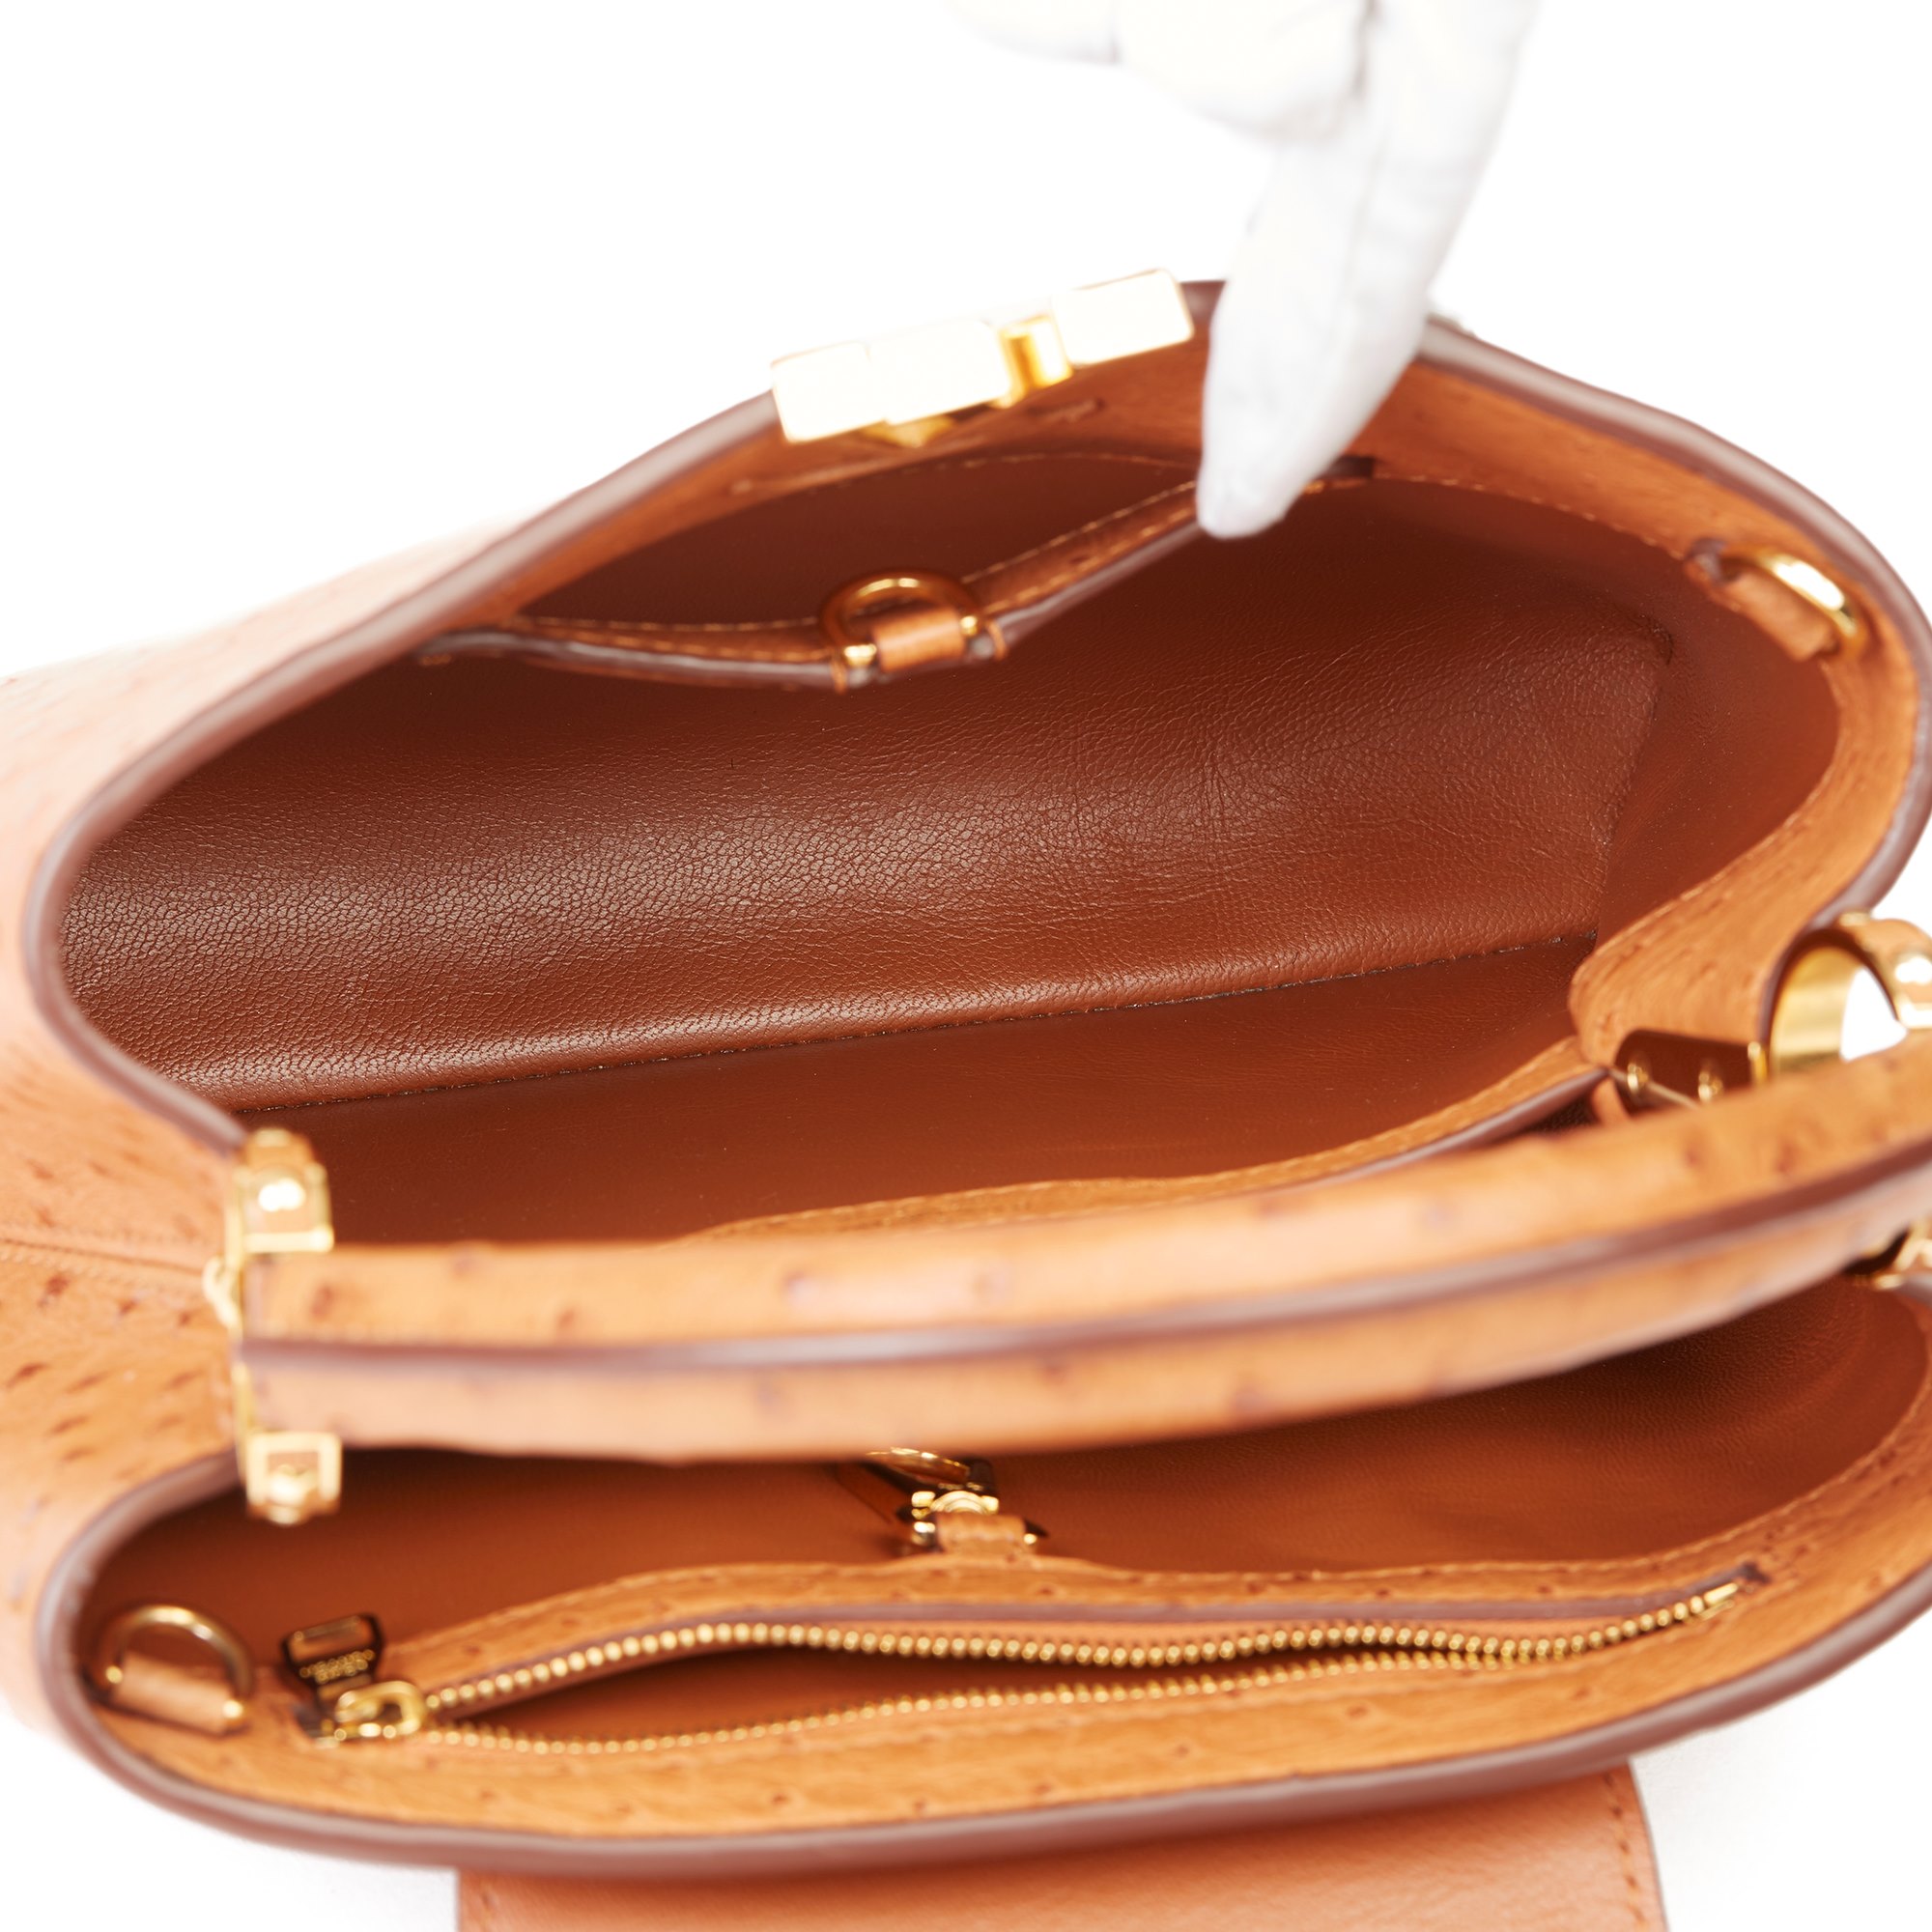 The Louis Vuitton Capucines Reference Guide - PurseBop